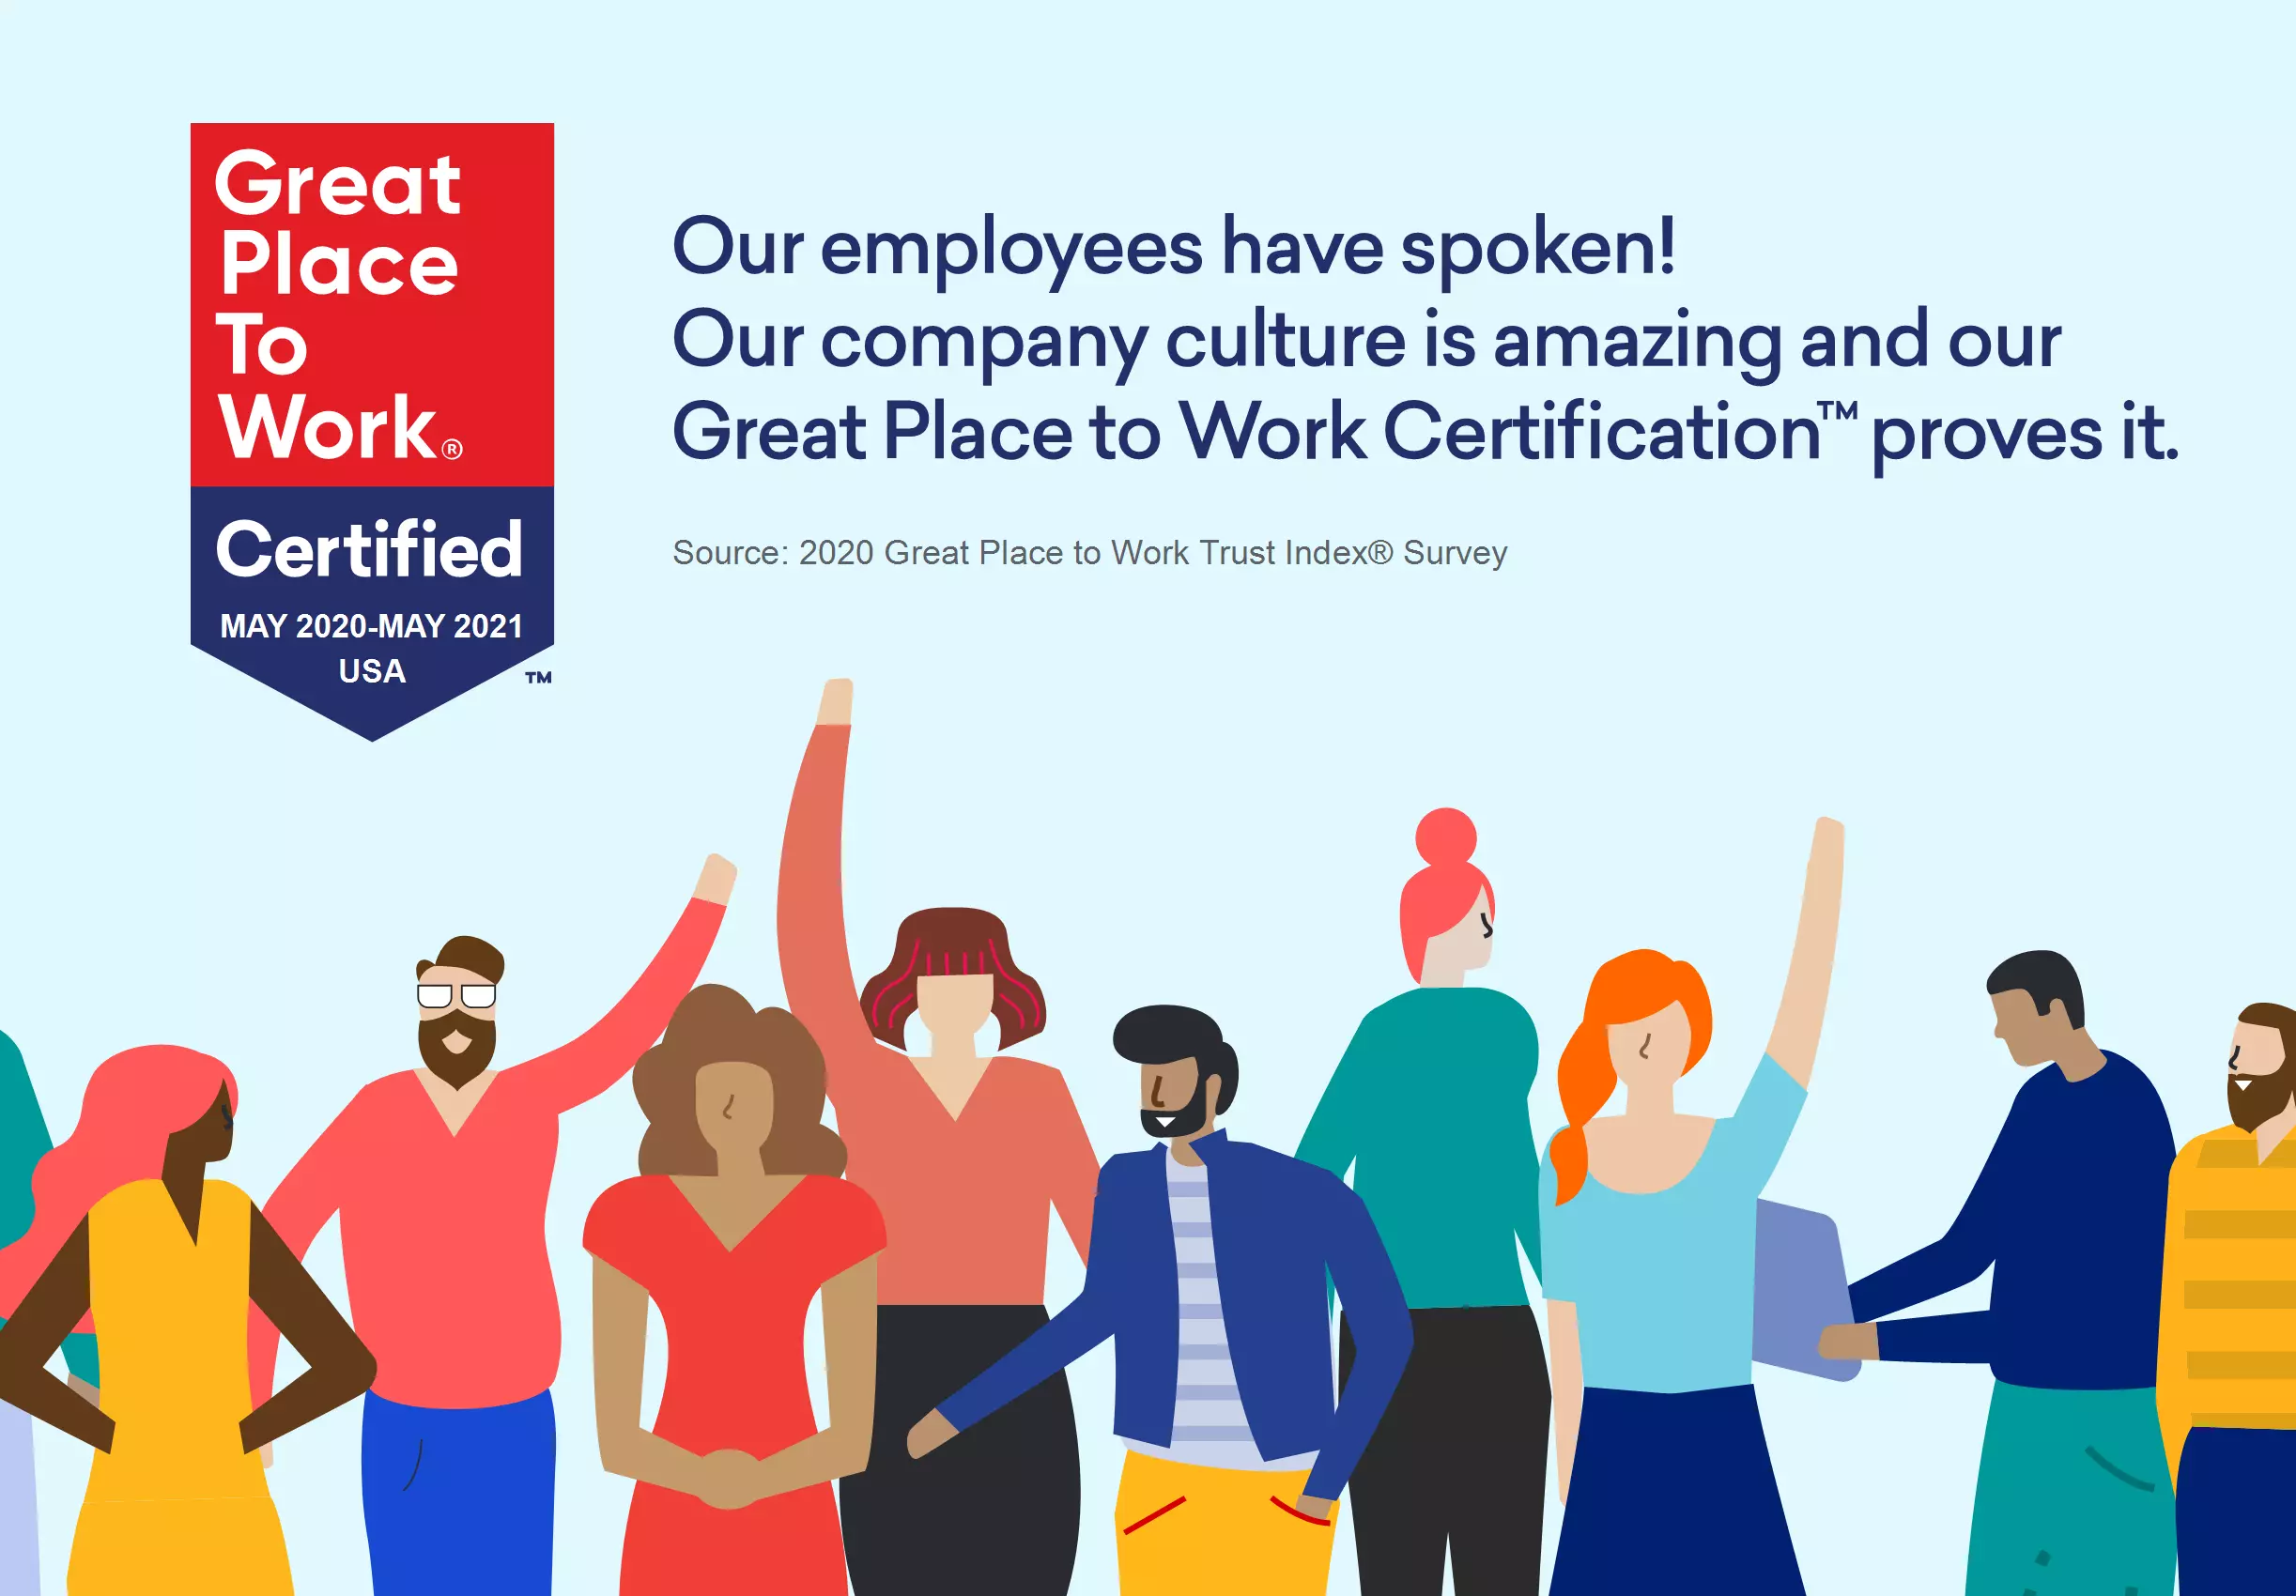 Sphere Partners is a Certified Great Place to Work™